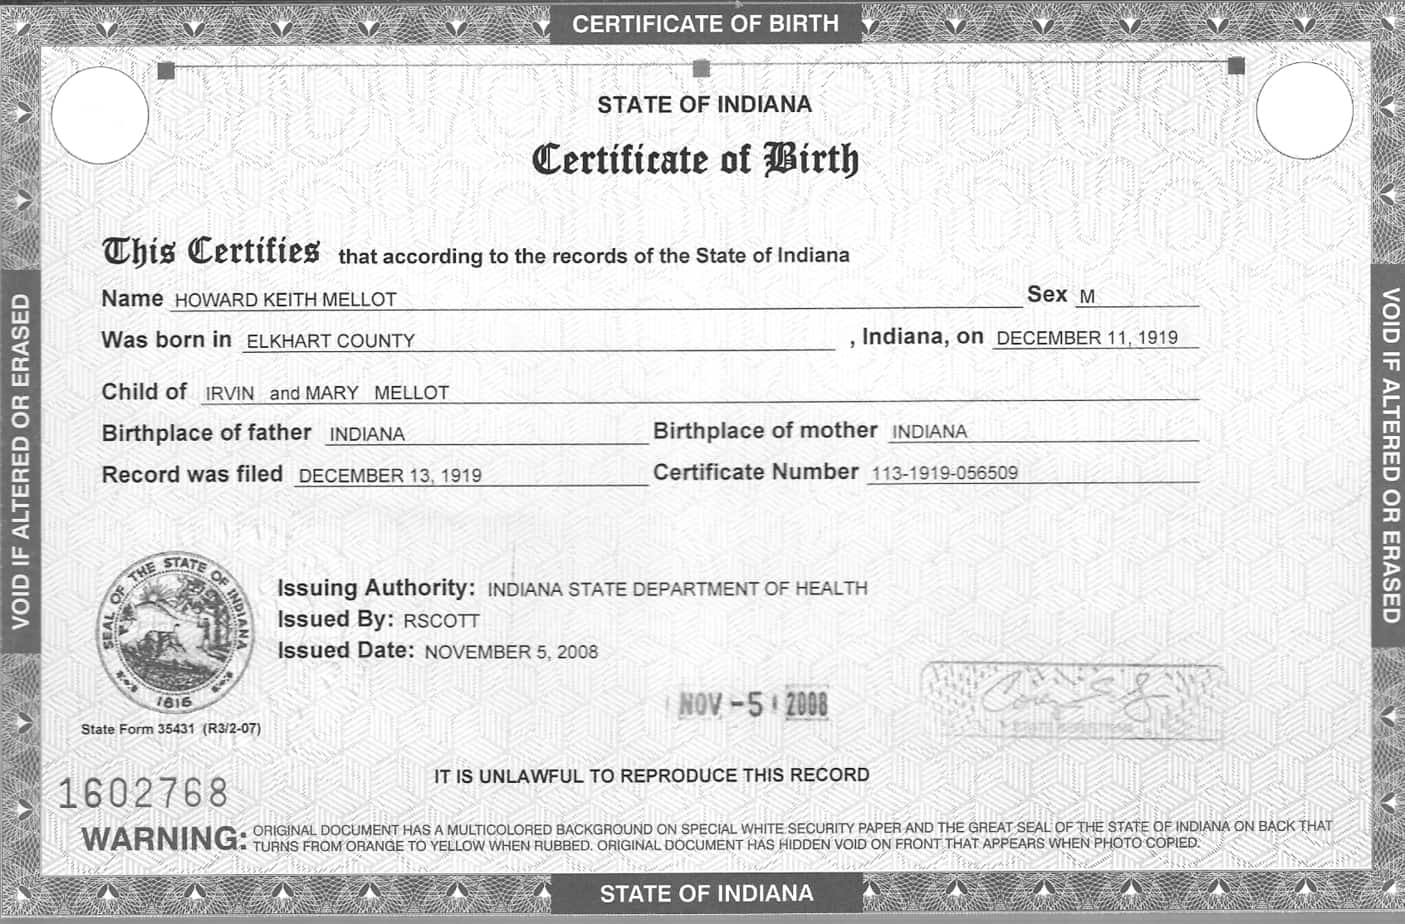 certified copy of my birth certificate